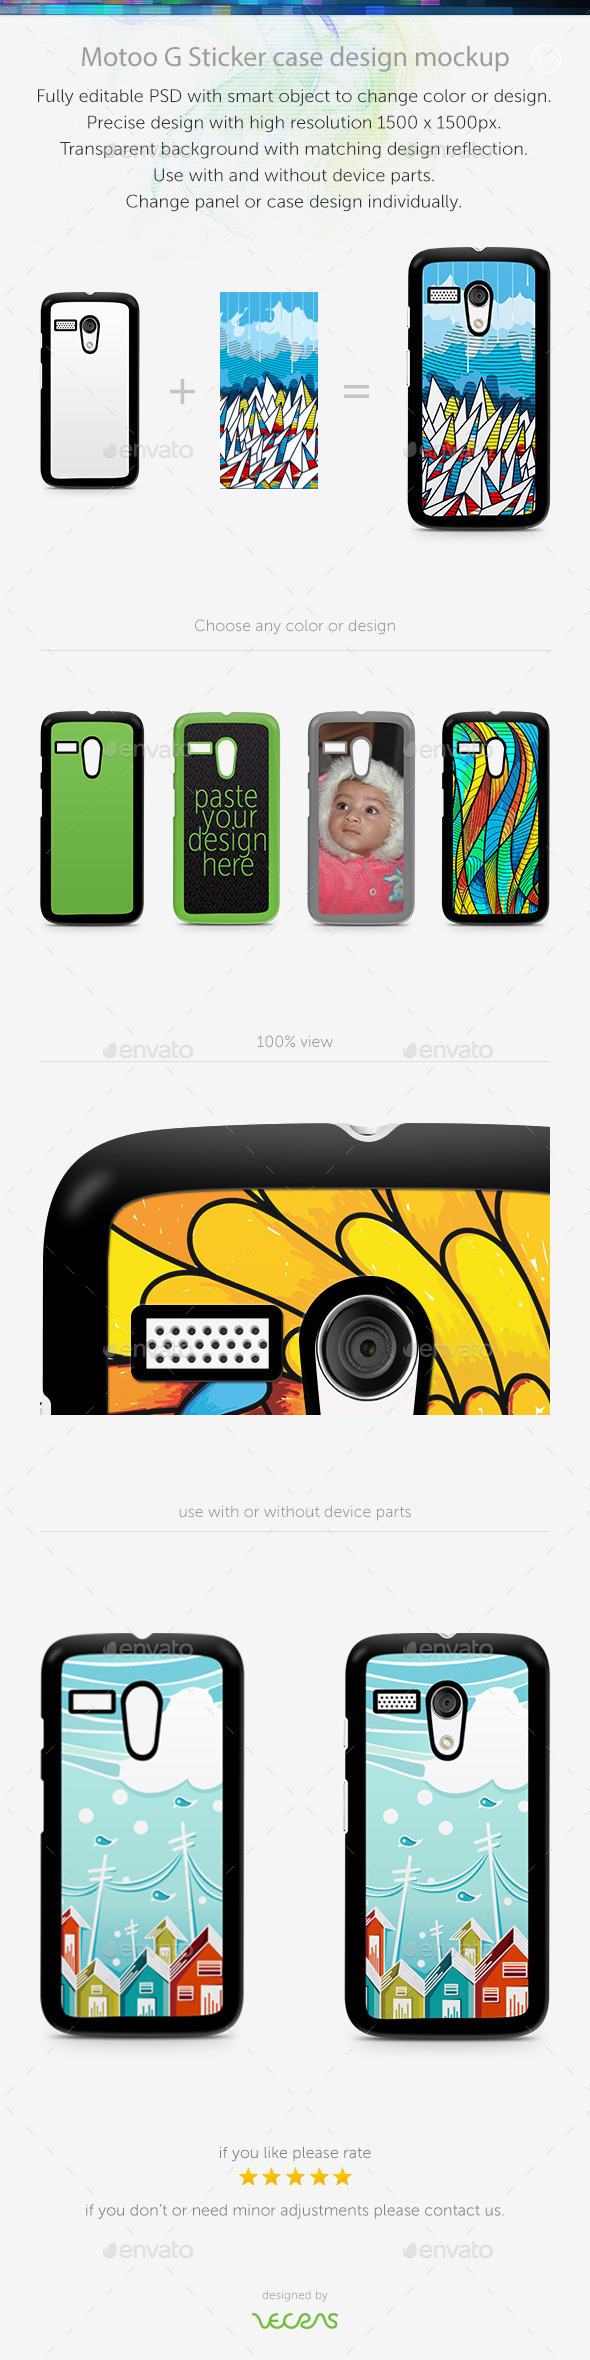 Preview motoo g stickercase mockup back